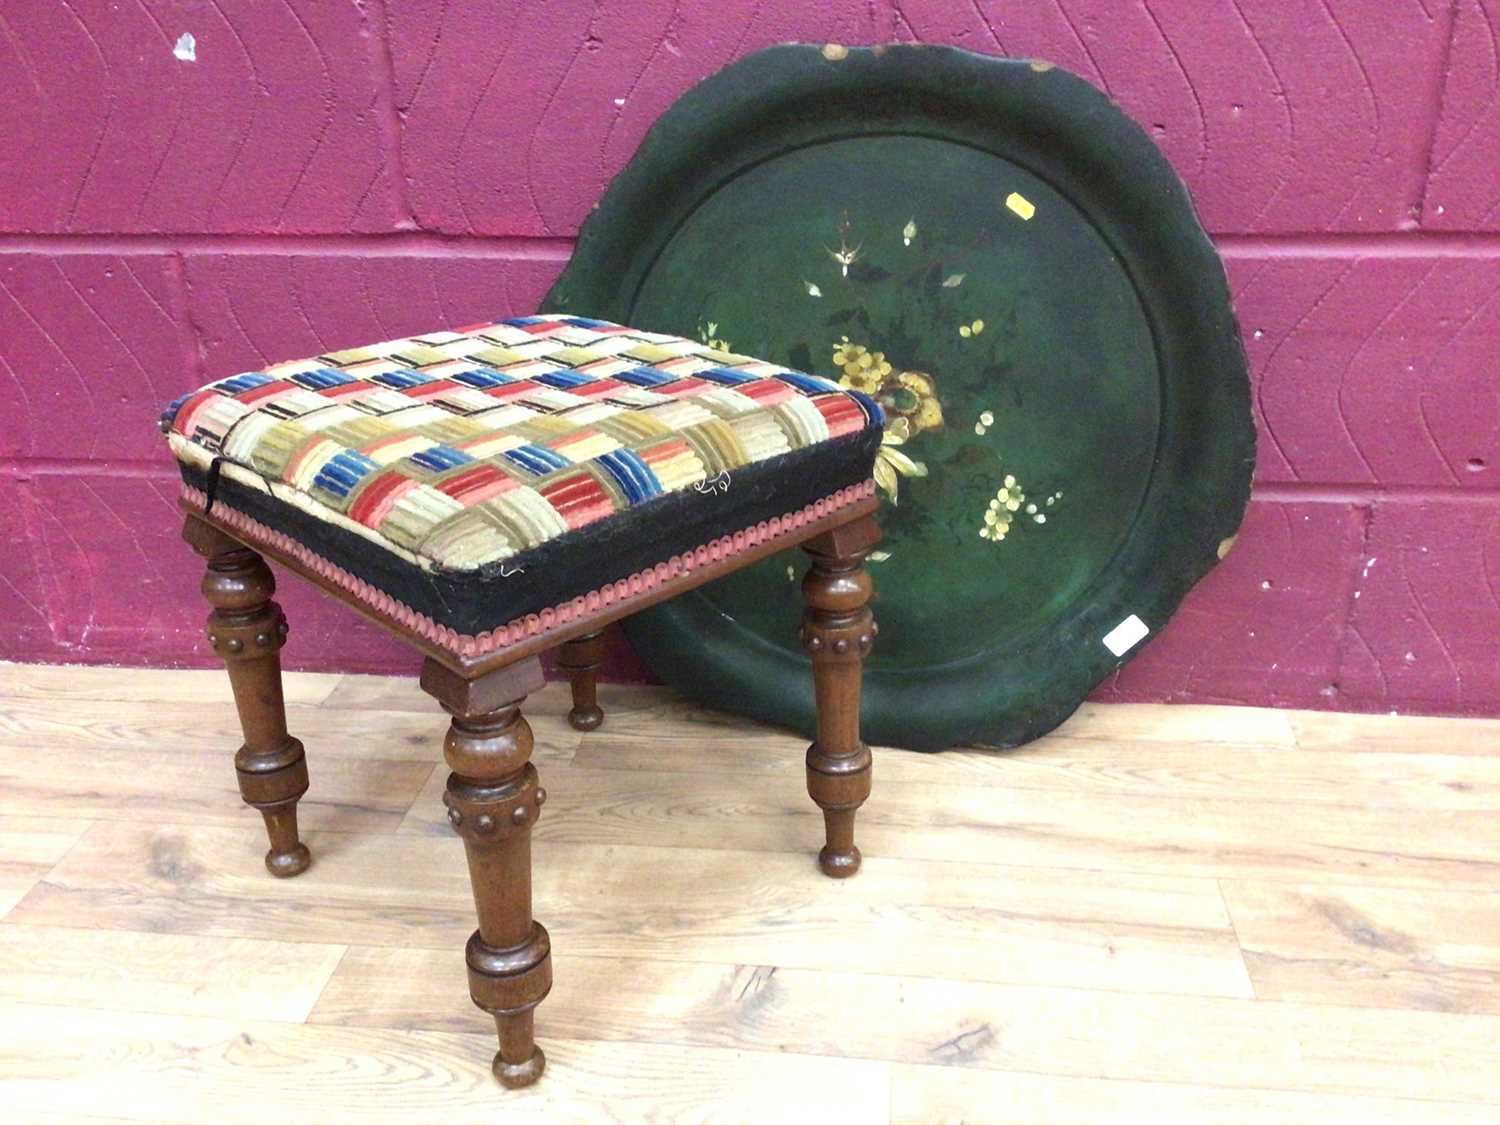 Lot 303 - Victorian stool on turned mahogany legs and a Victorian paper mache tray